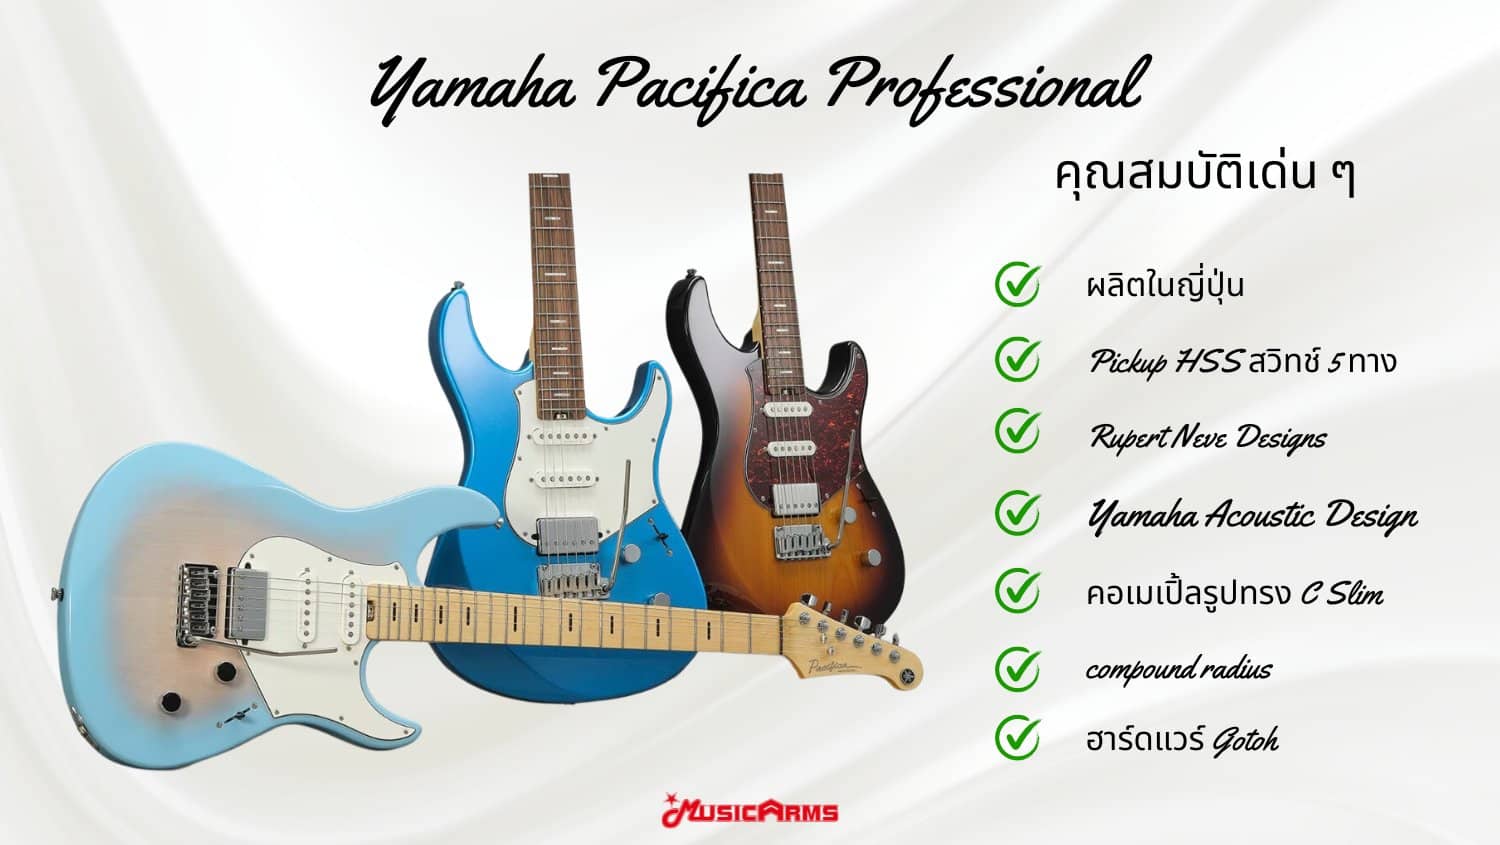 Yamaha Pacifica Professional-Content-09